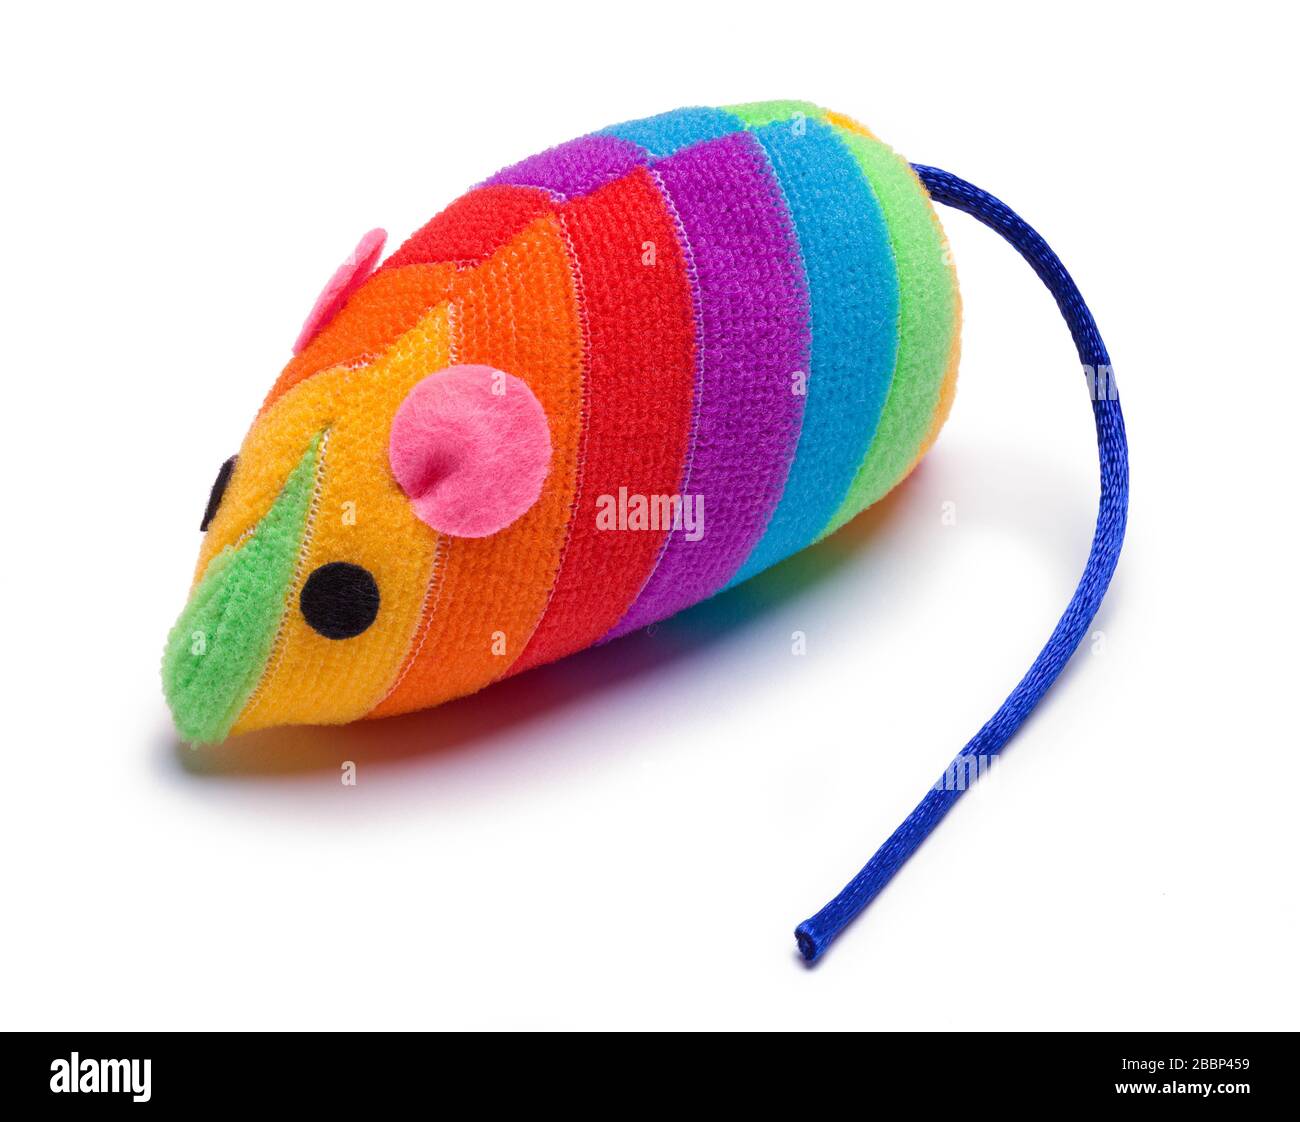 Colorful Mouse Cat Toy Isolated on White, Stock Photo